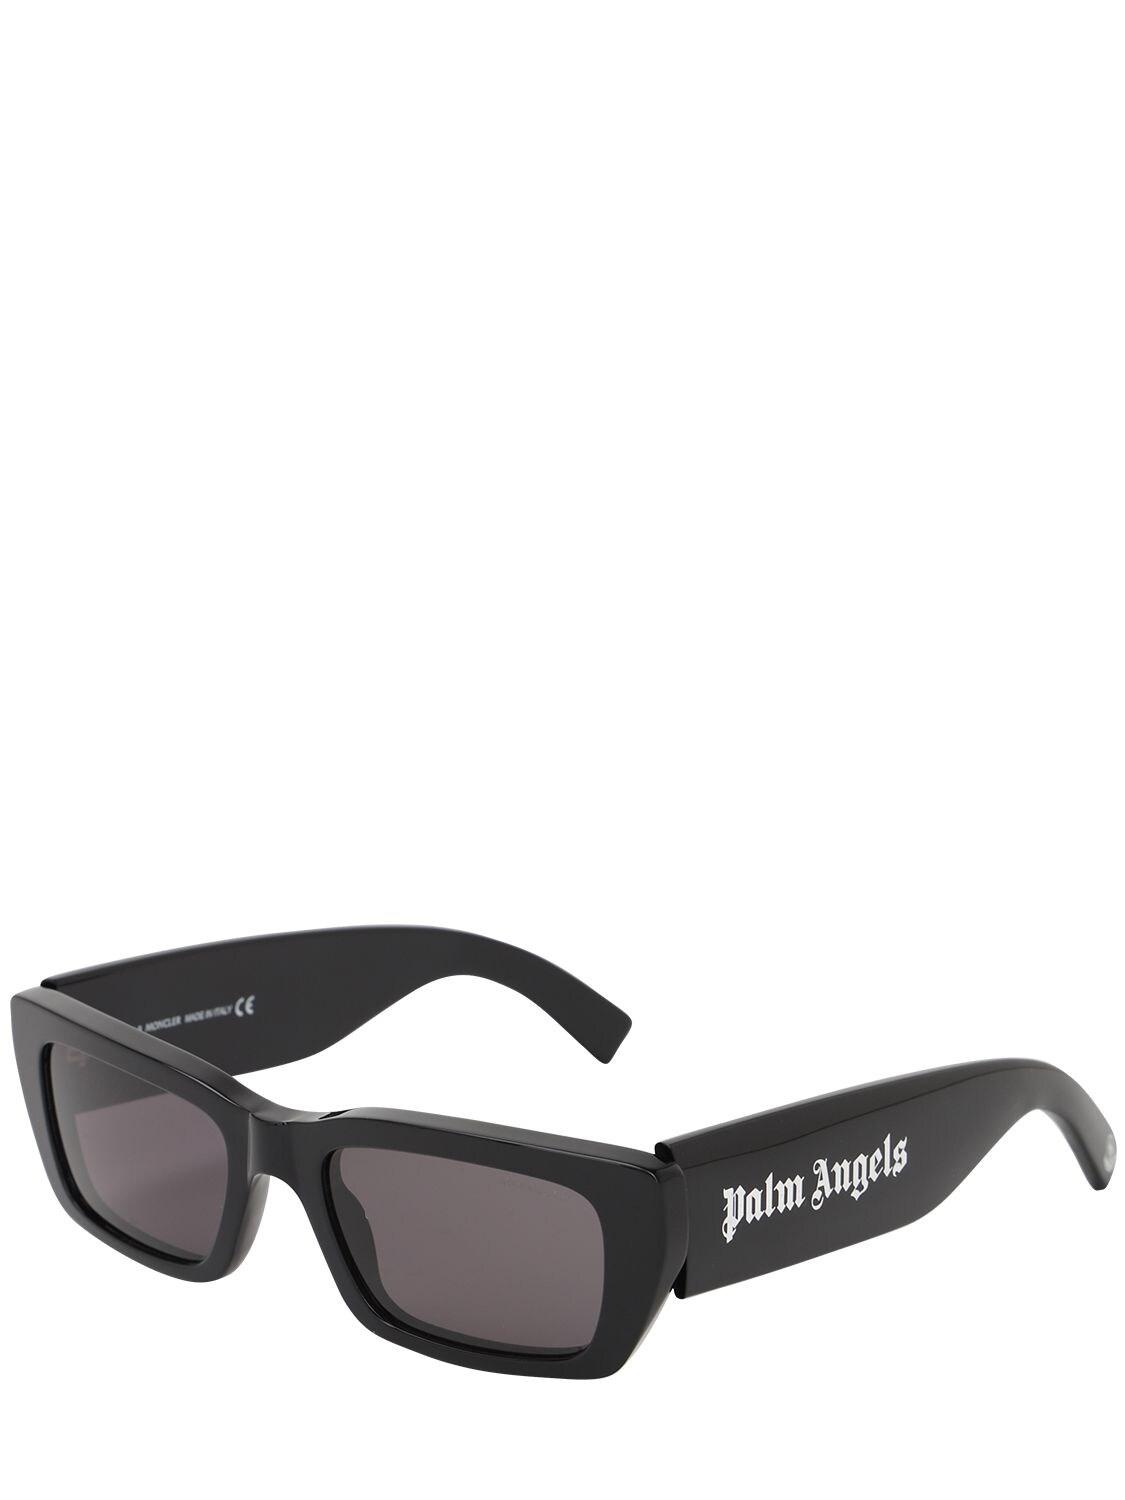 Moncler Genius Palm Angels X Moncler Squared Sunglasses in Black/Grey ...